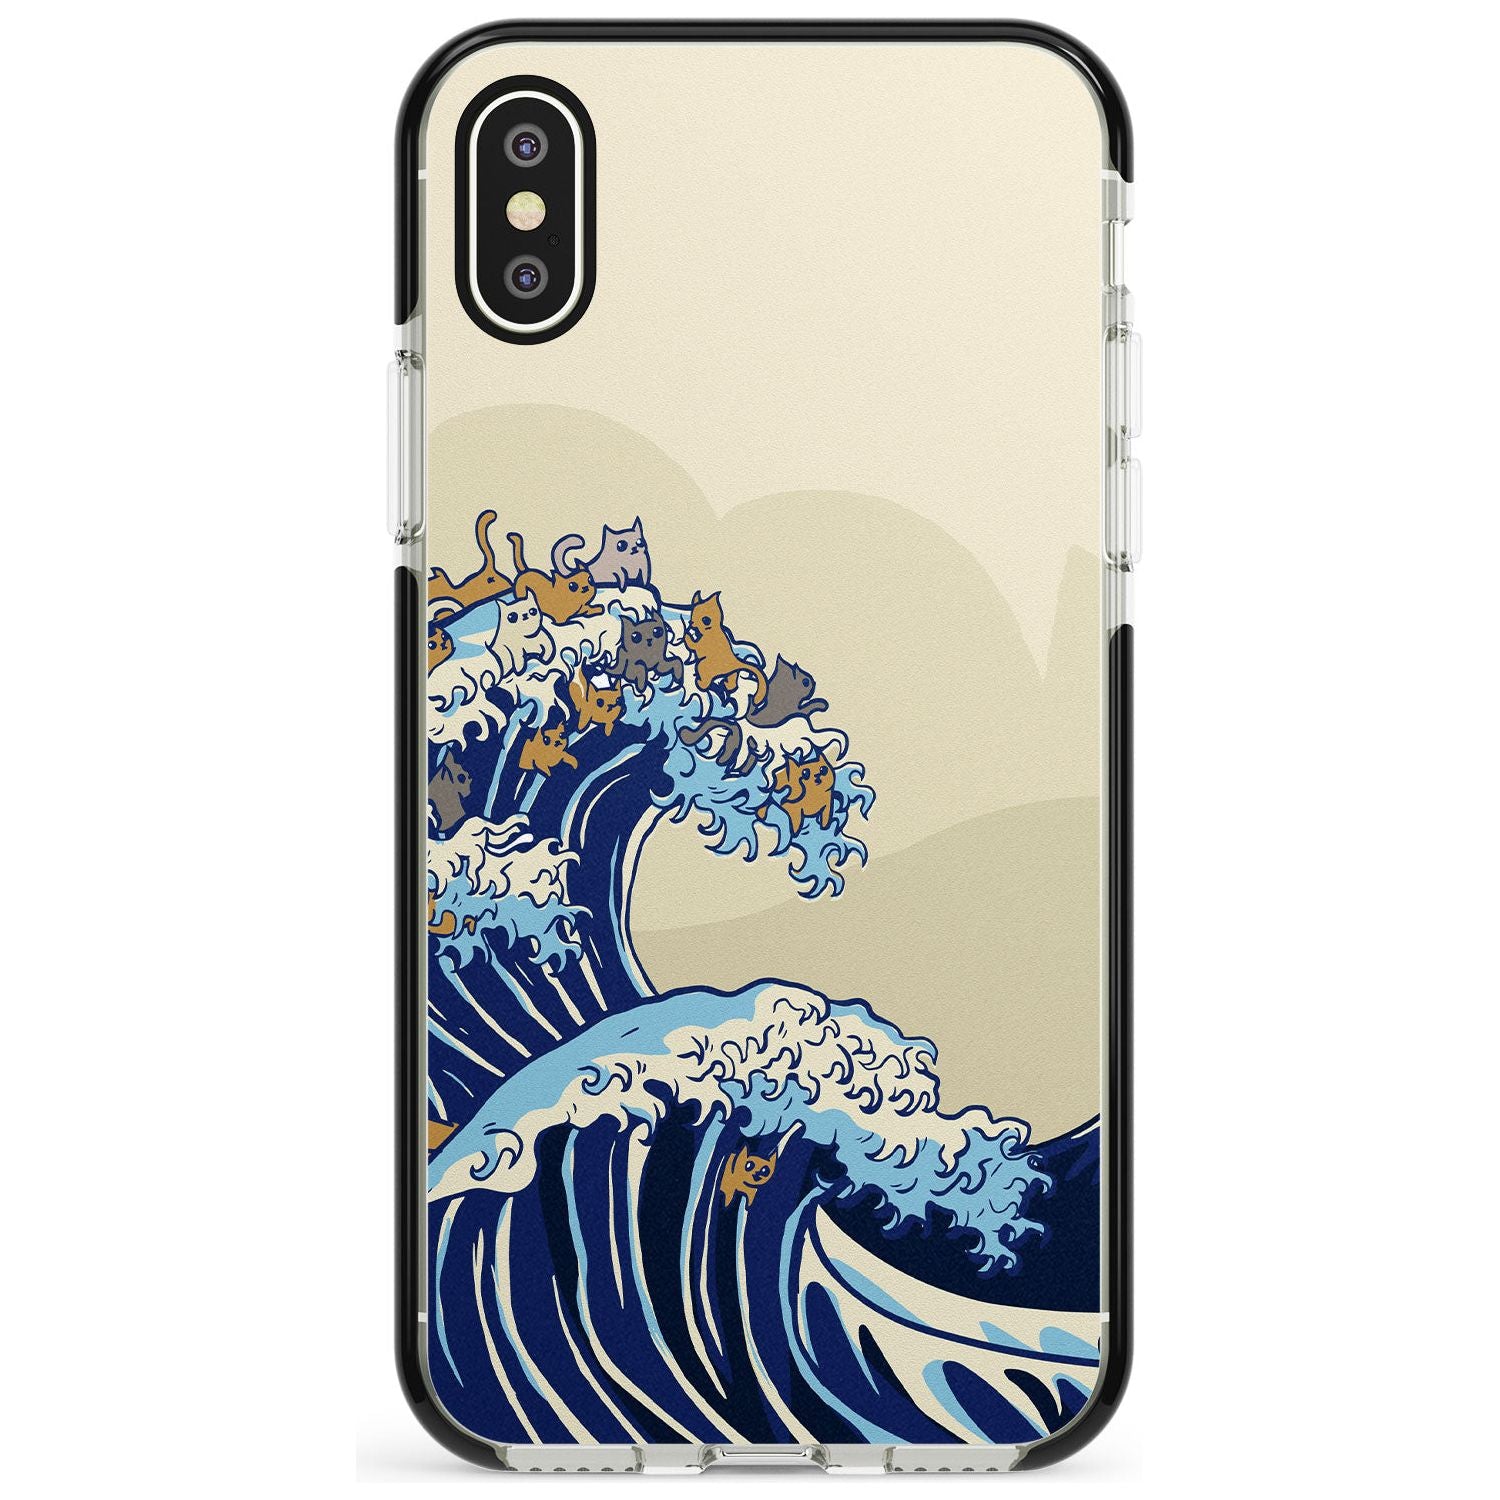 The Great Cat Wave Black Impact Phone Case for iPhone X XS Max XR